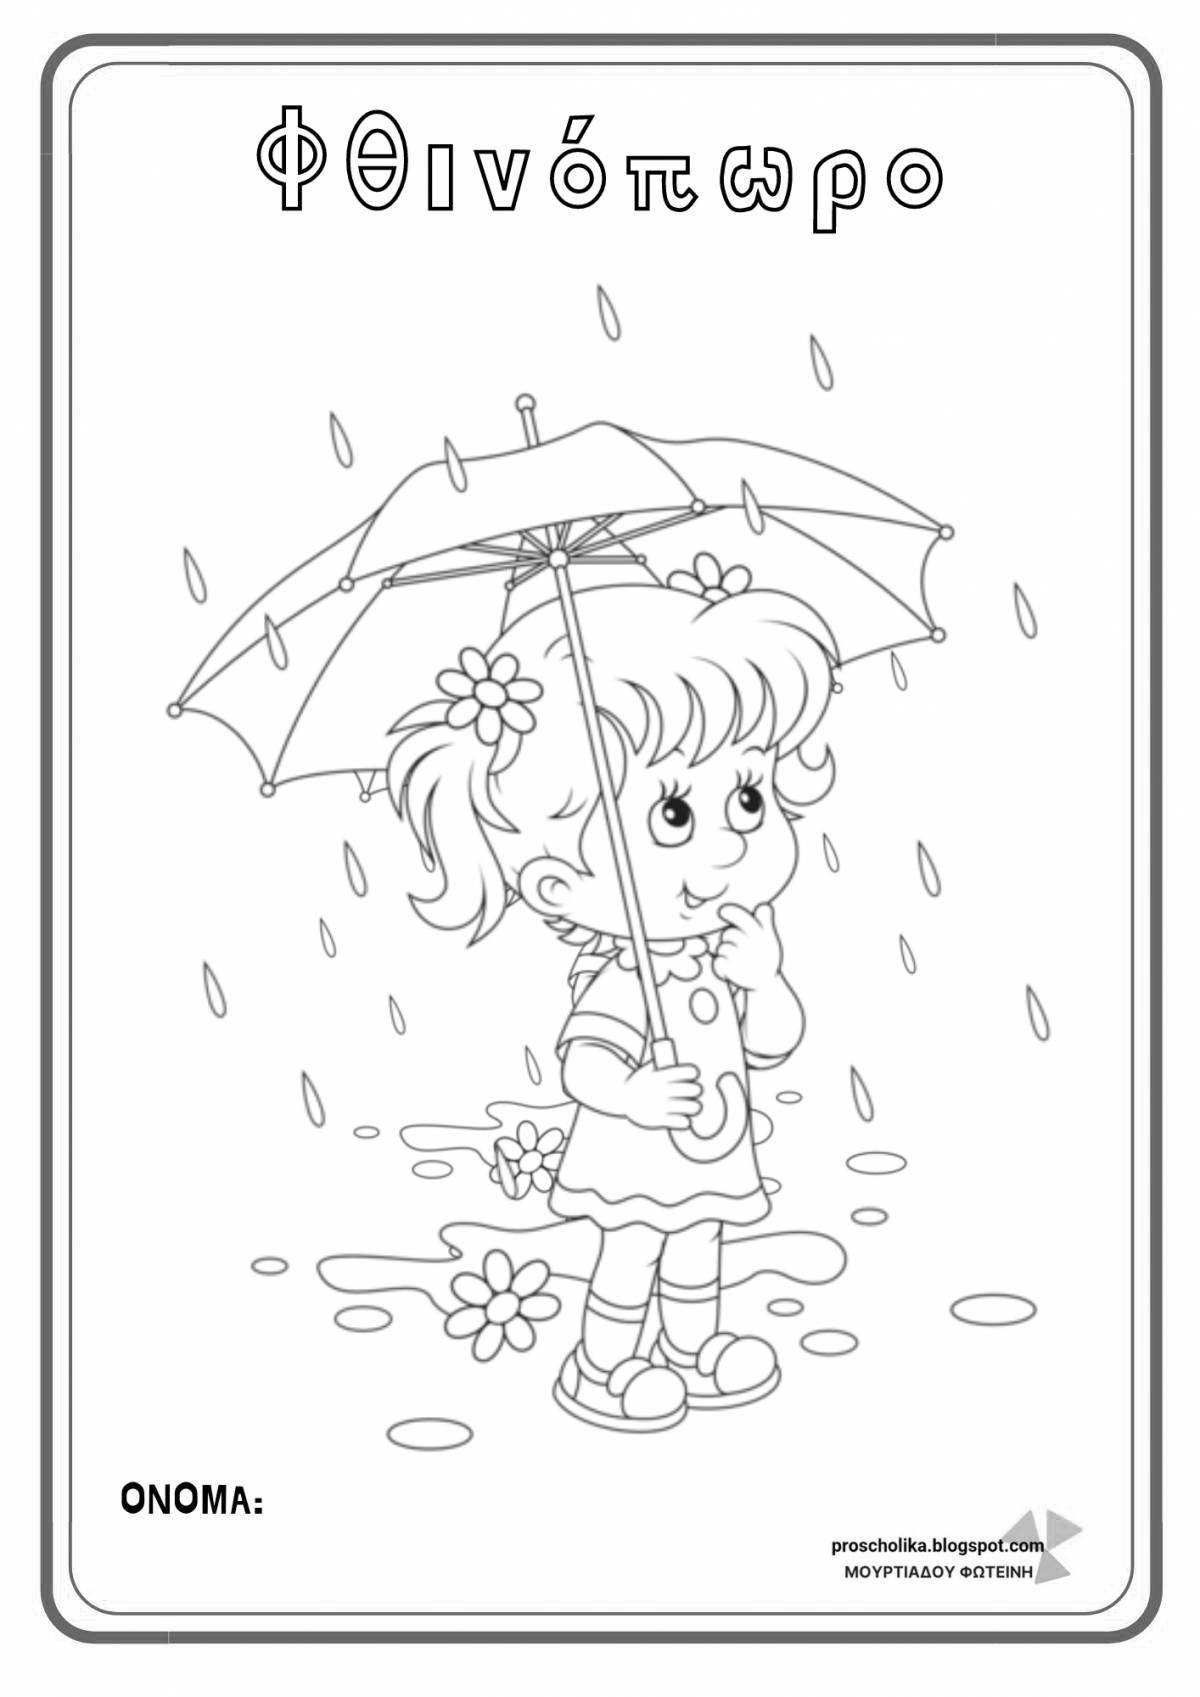 Exquisite spring rain coloring page